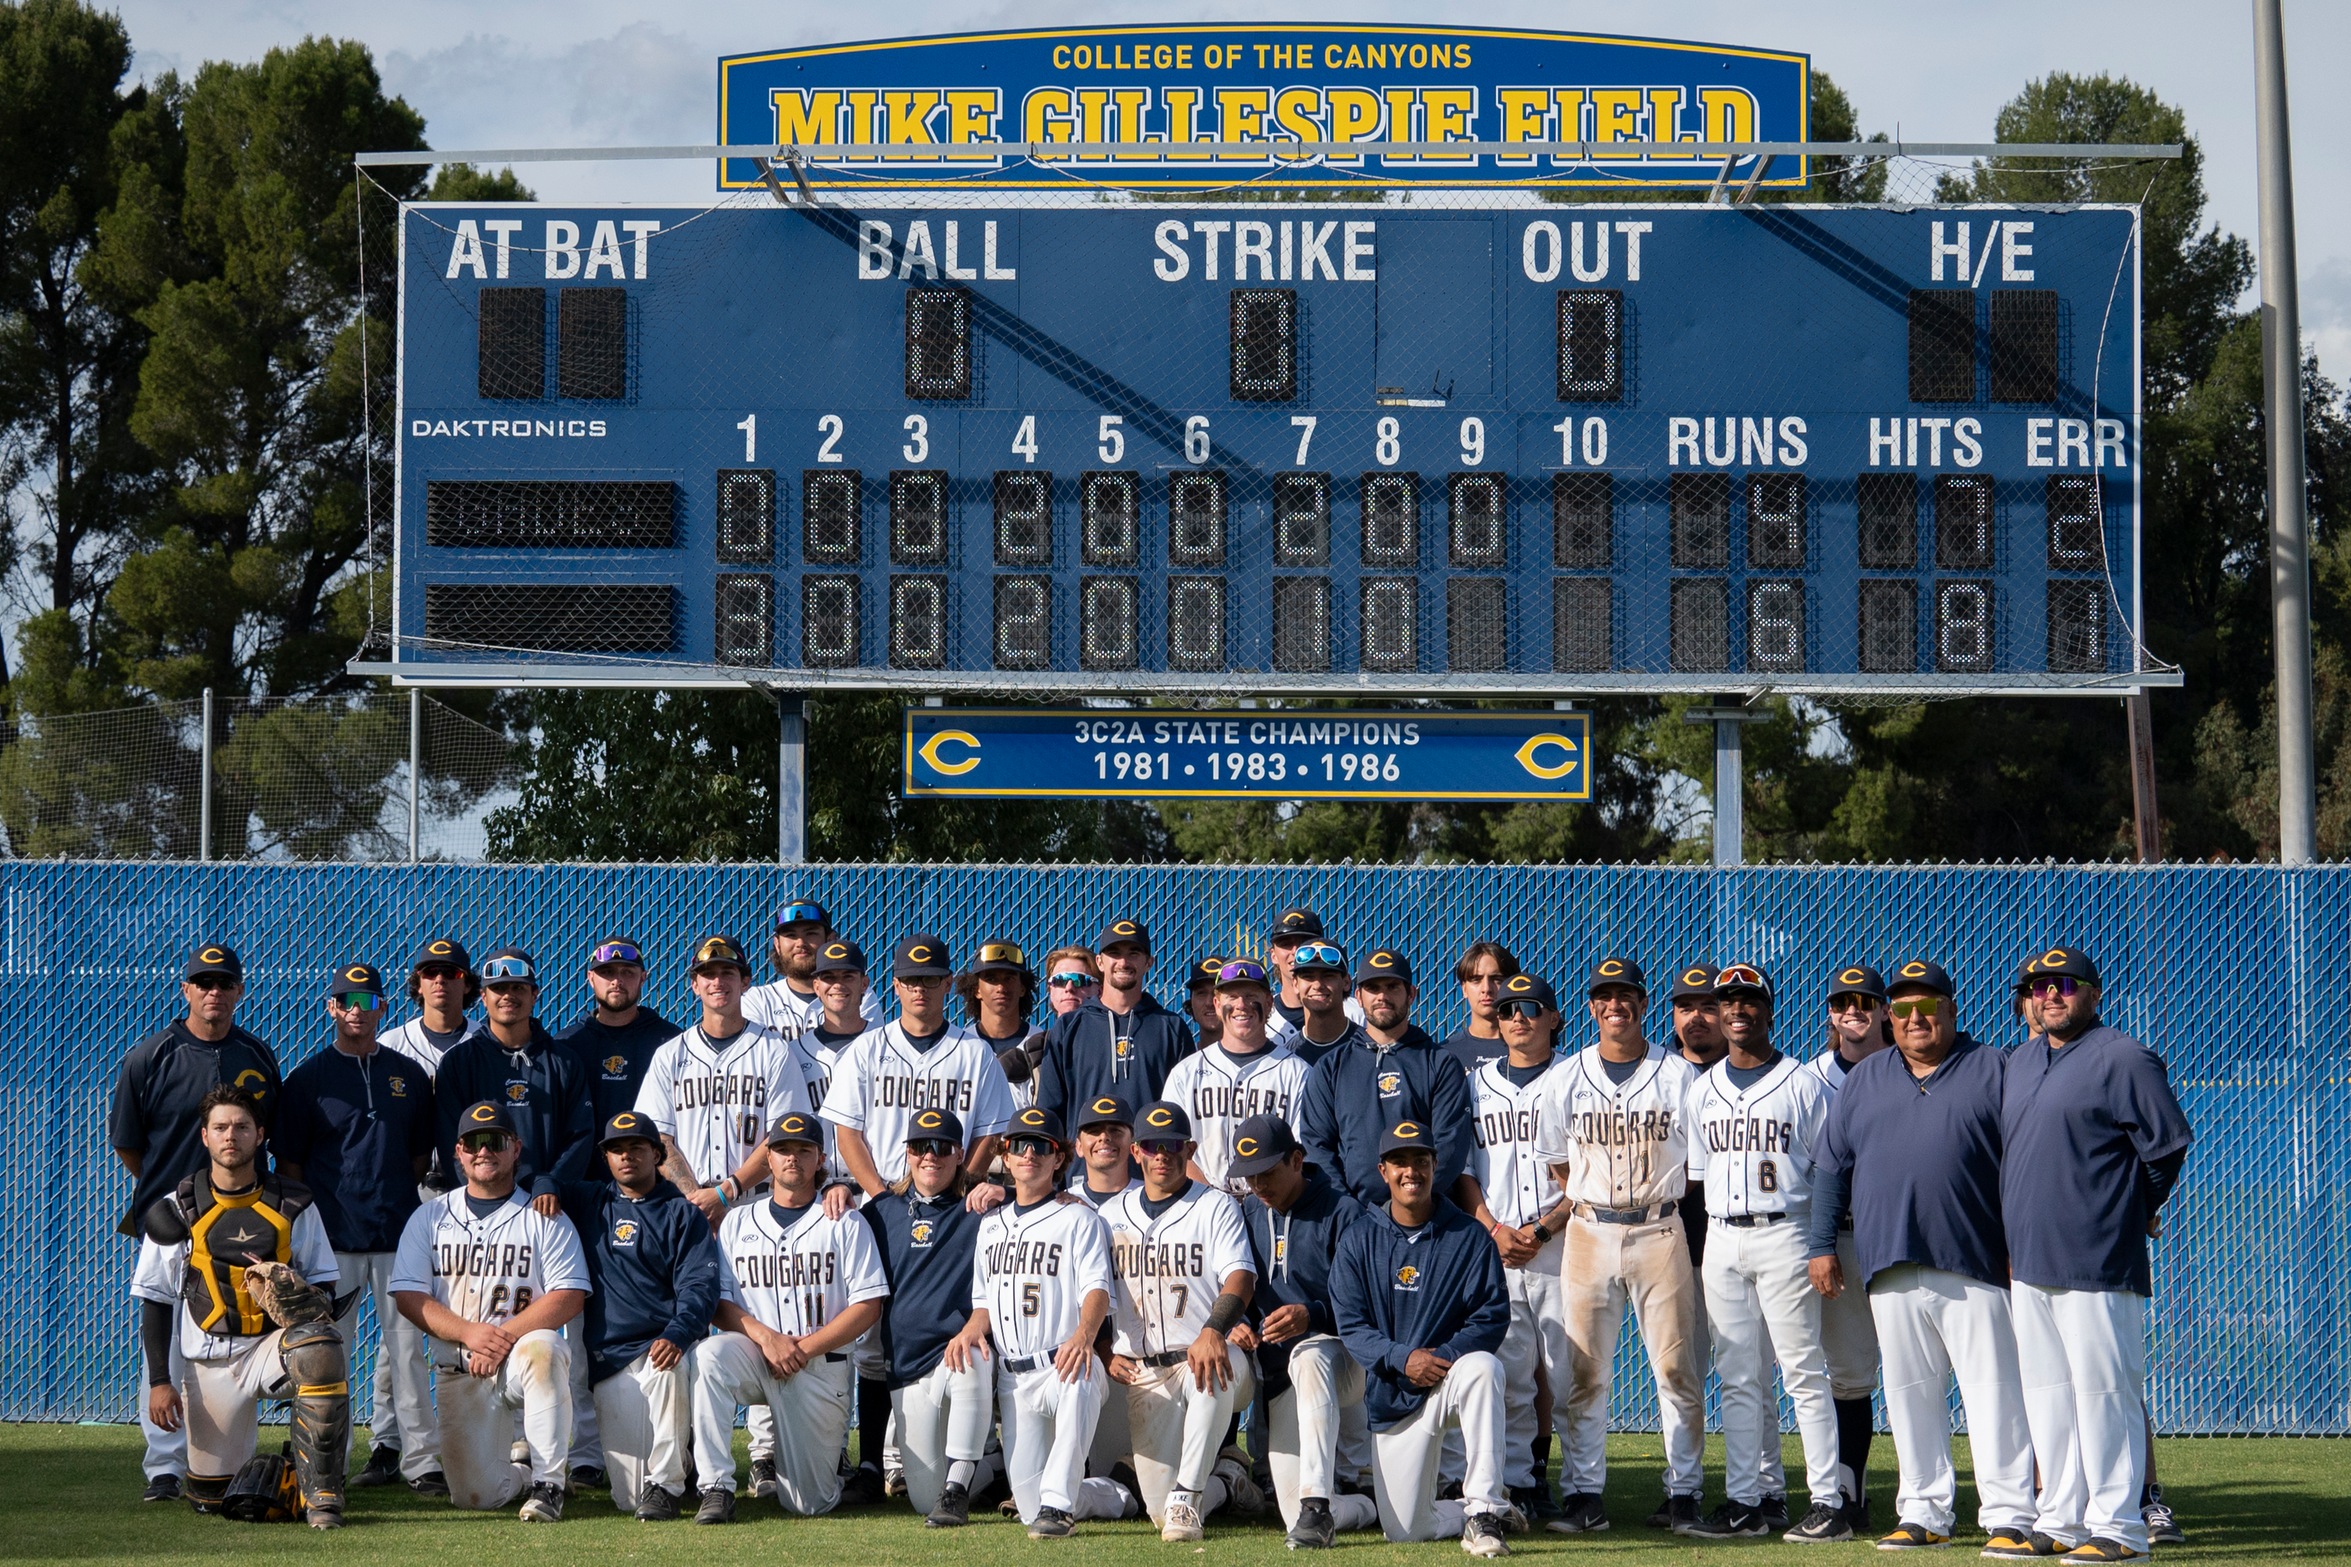 Group picture of the College of the Canyons baseball team standing in front of the newly installed Mike Gillespie Field scoreboard.